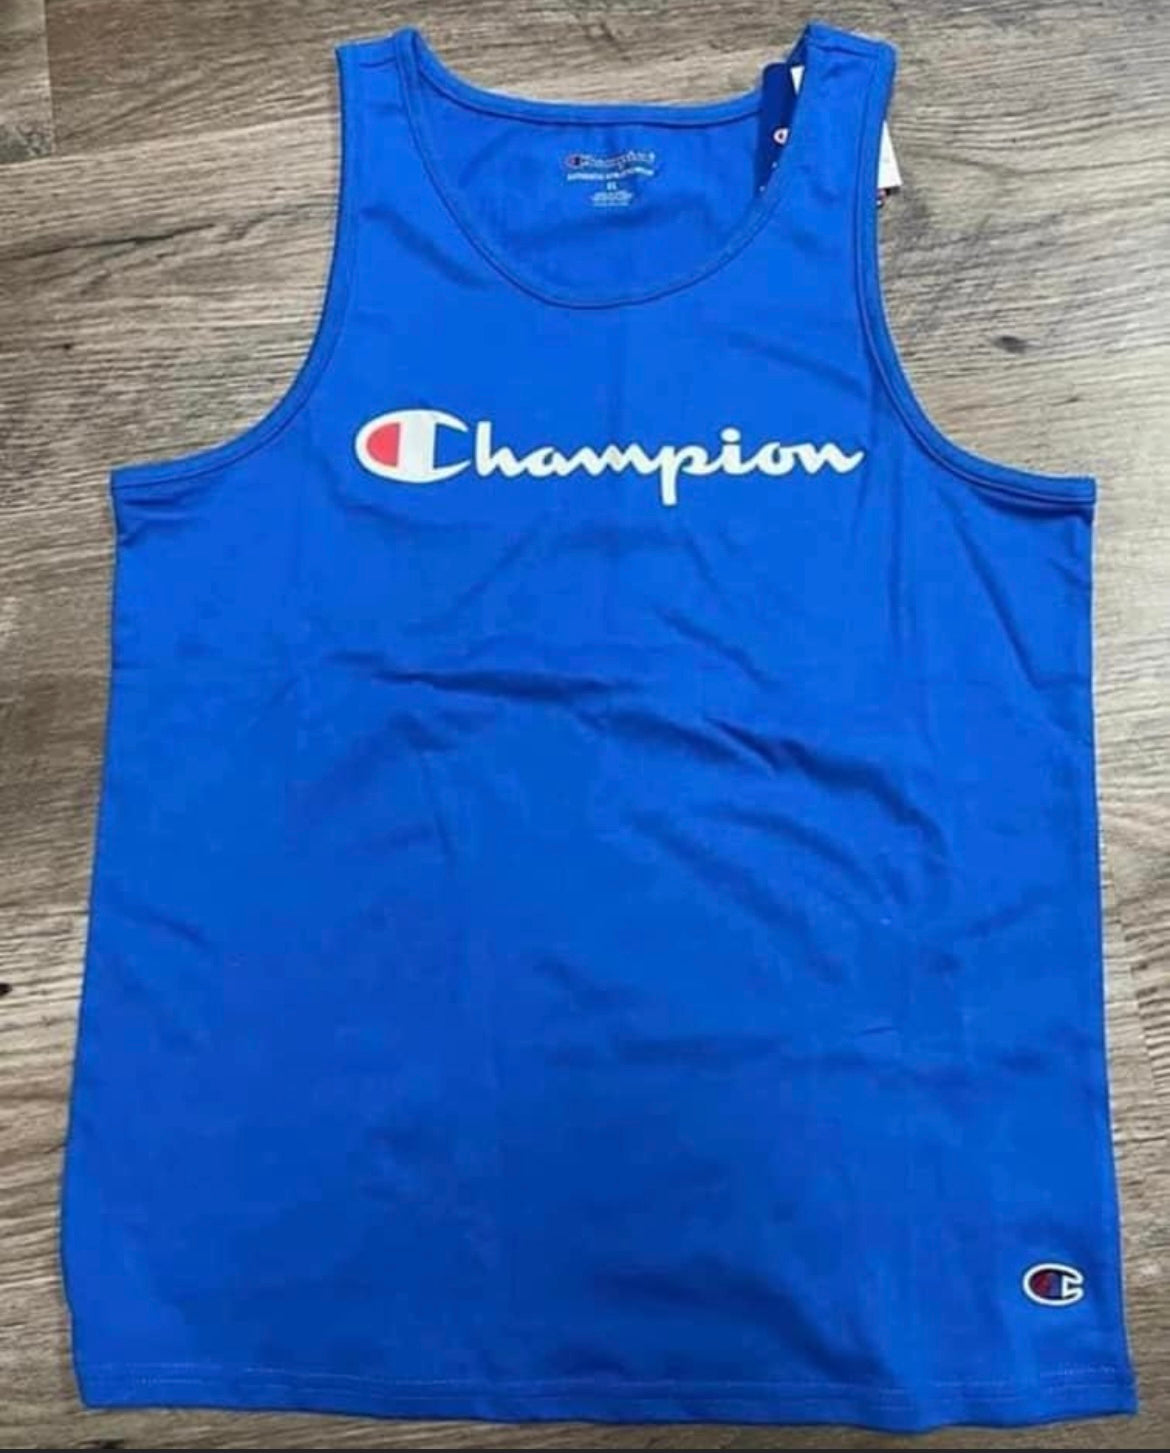 New boy XL champions muscle tee blue